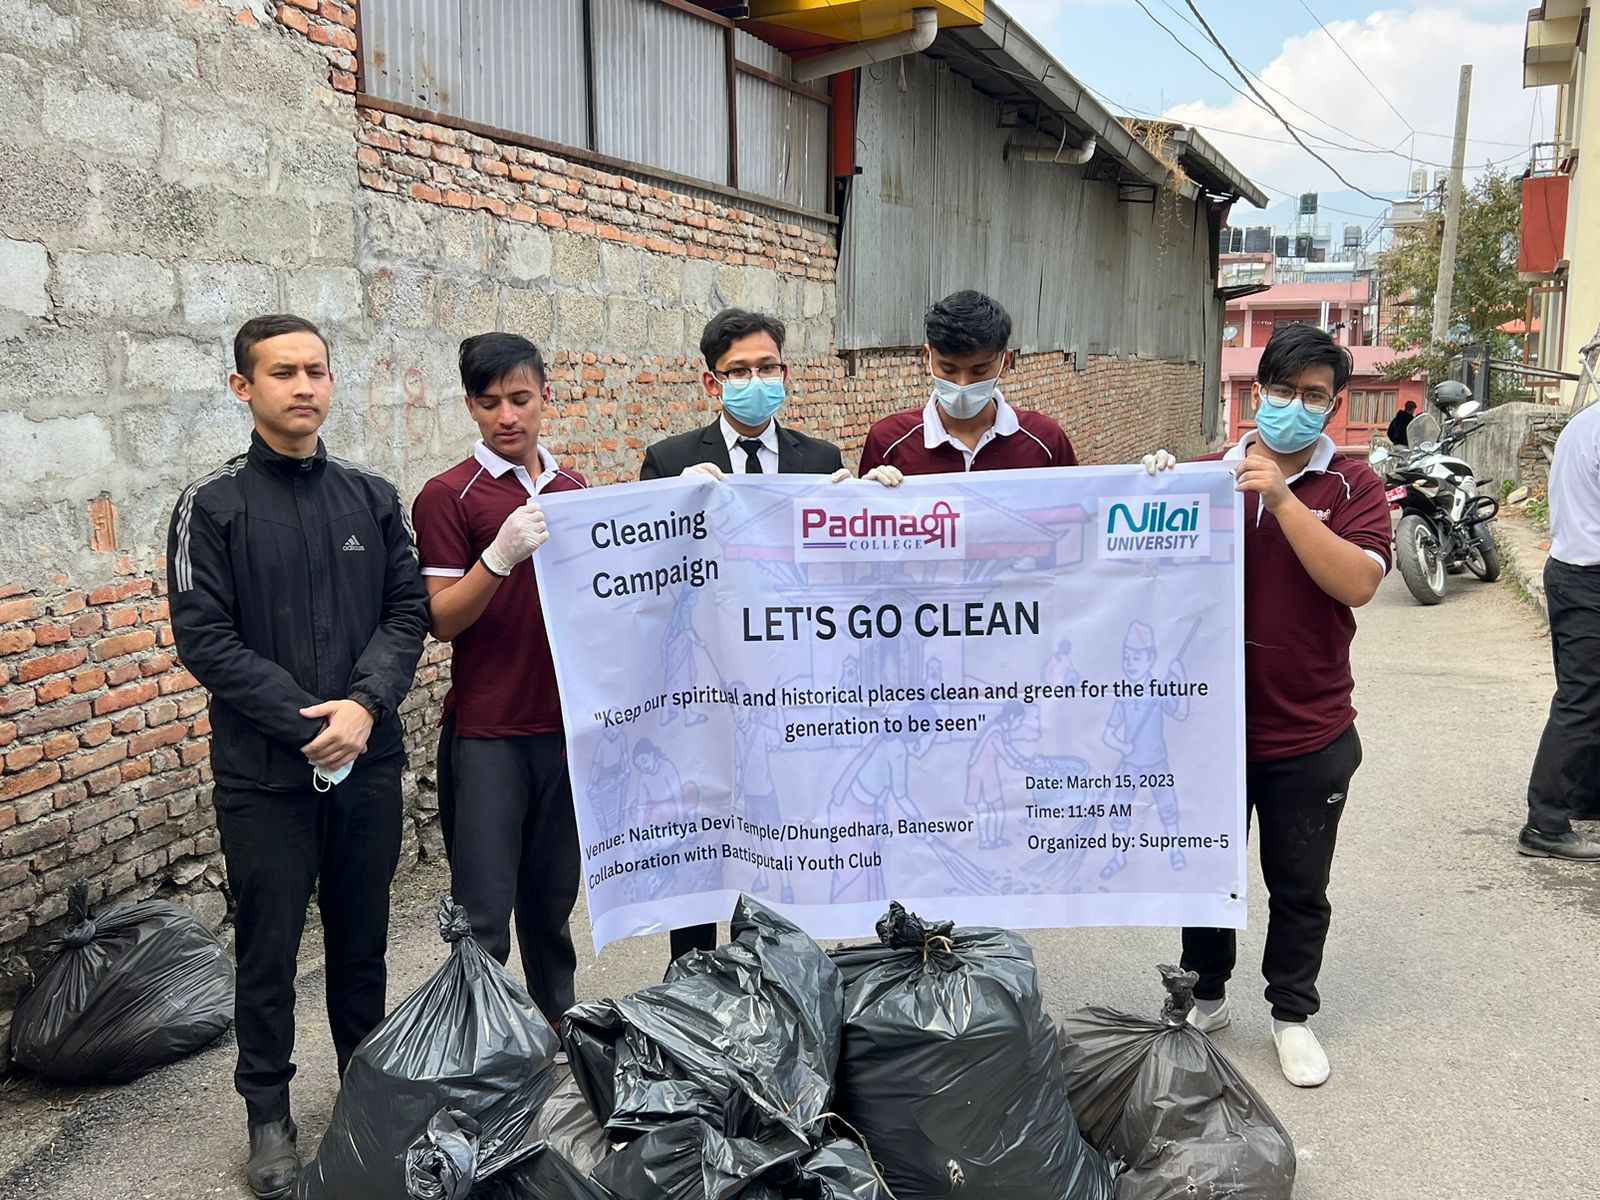 Community Service - Cleanliness